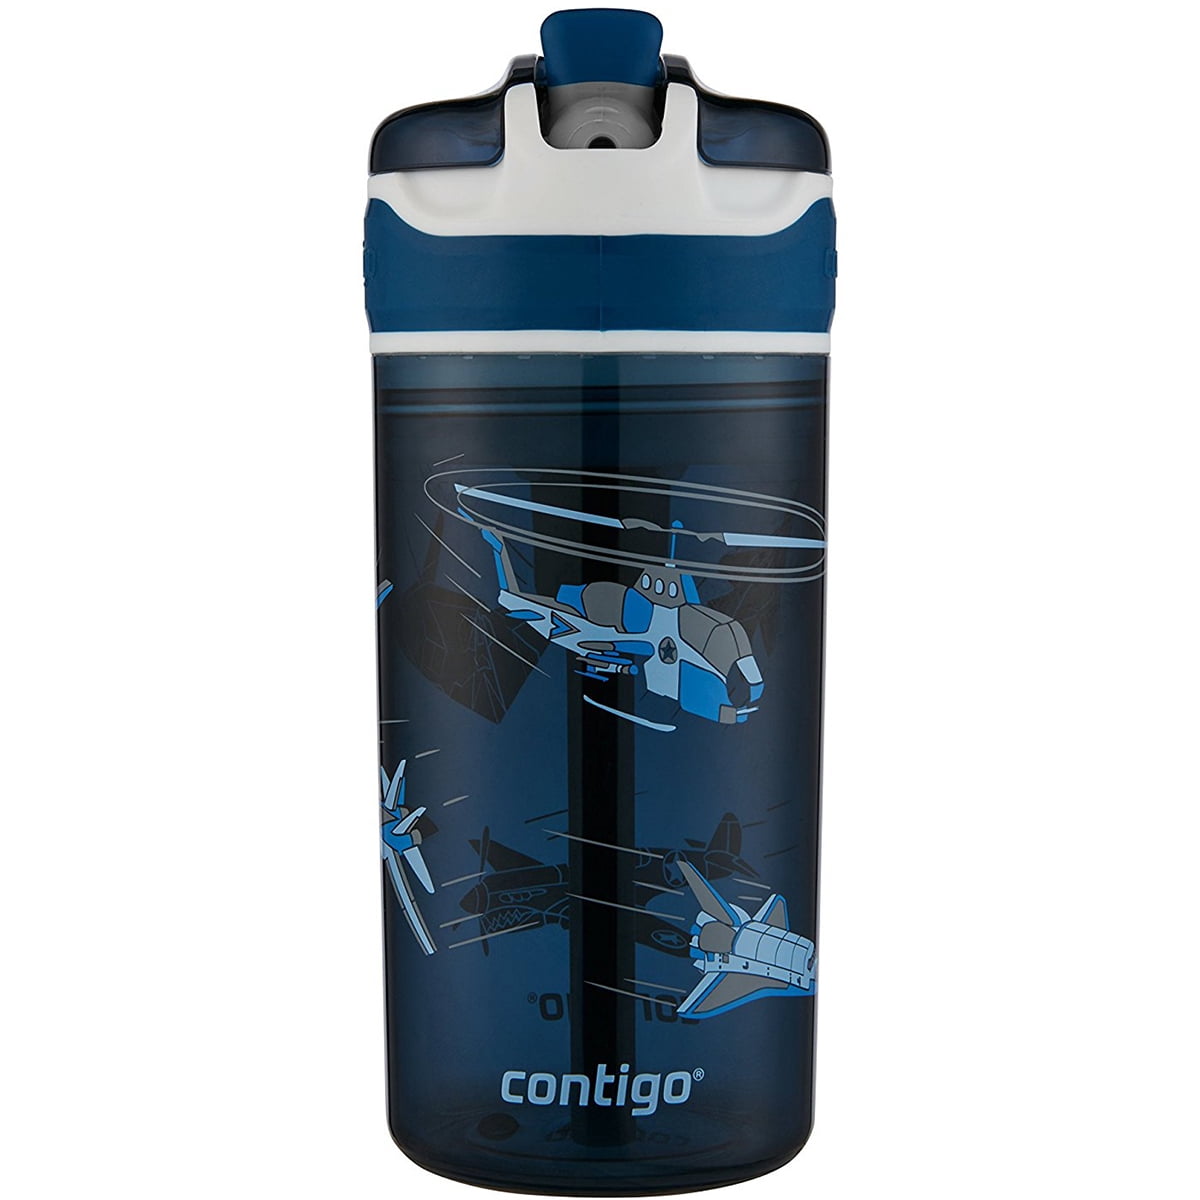 Contigo Snack Hero Water Bottle Set 2 in 1 with 4oz Snack Compartment Red &  Blue